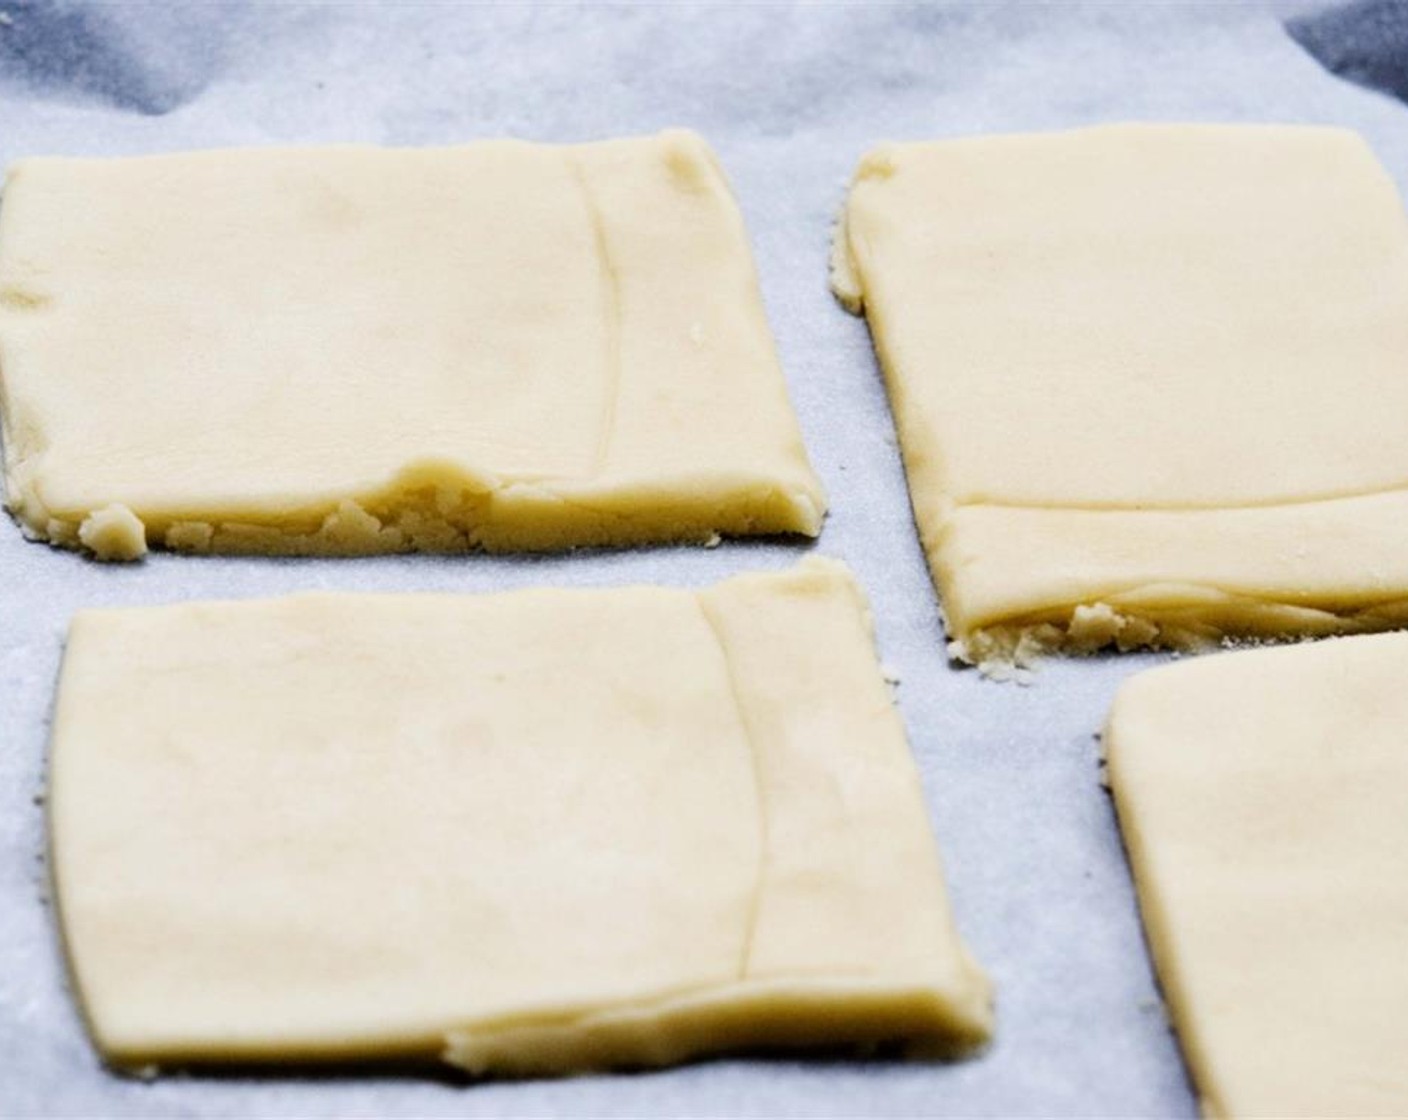 step 5 On a slightly floured surface, roll out the dough to a 0.5-centimeter thickness, and cut out 3-centimeter by 2-centimeter rectangles to make a flag shape. Place on a baking sheet and refrigerate for 20 to 30 minutes.